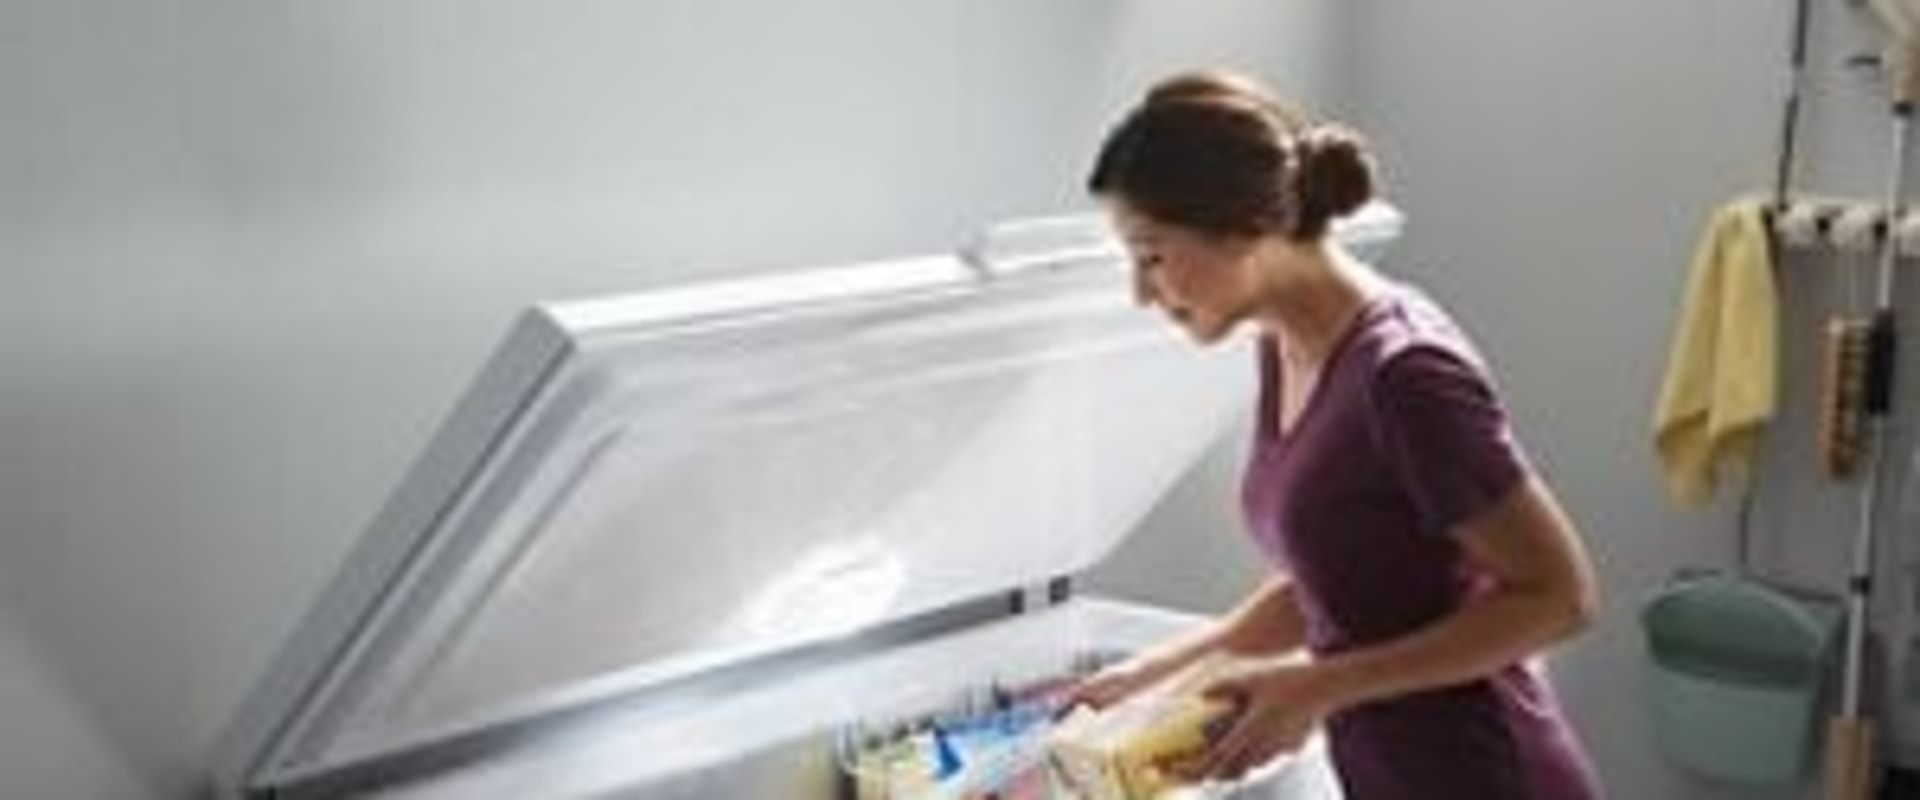 Troubleshooting Common Issues with Freezer Cooling